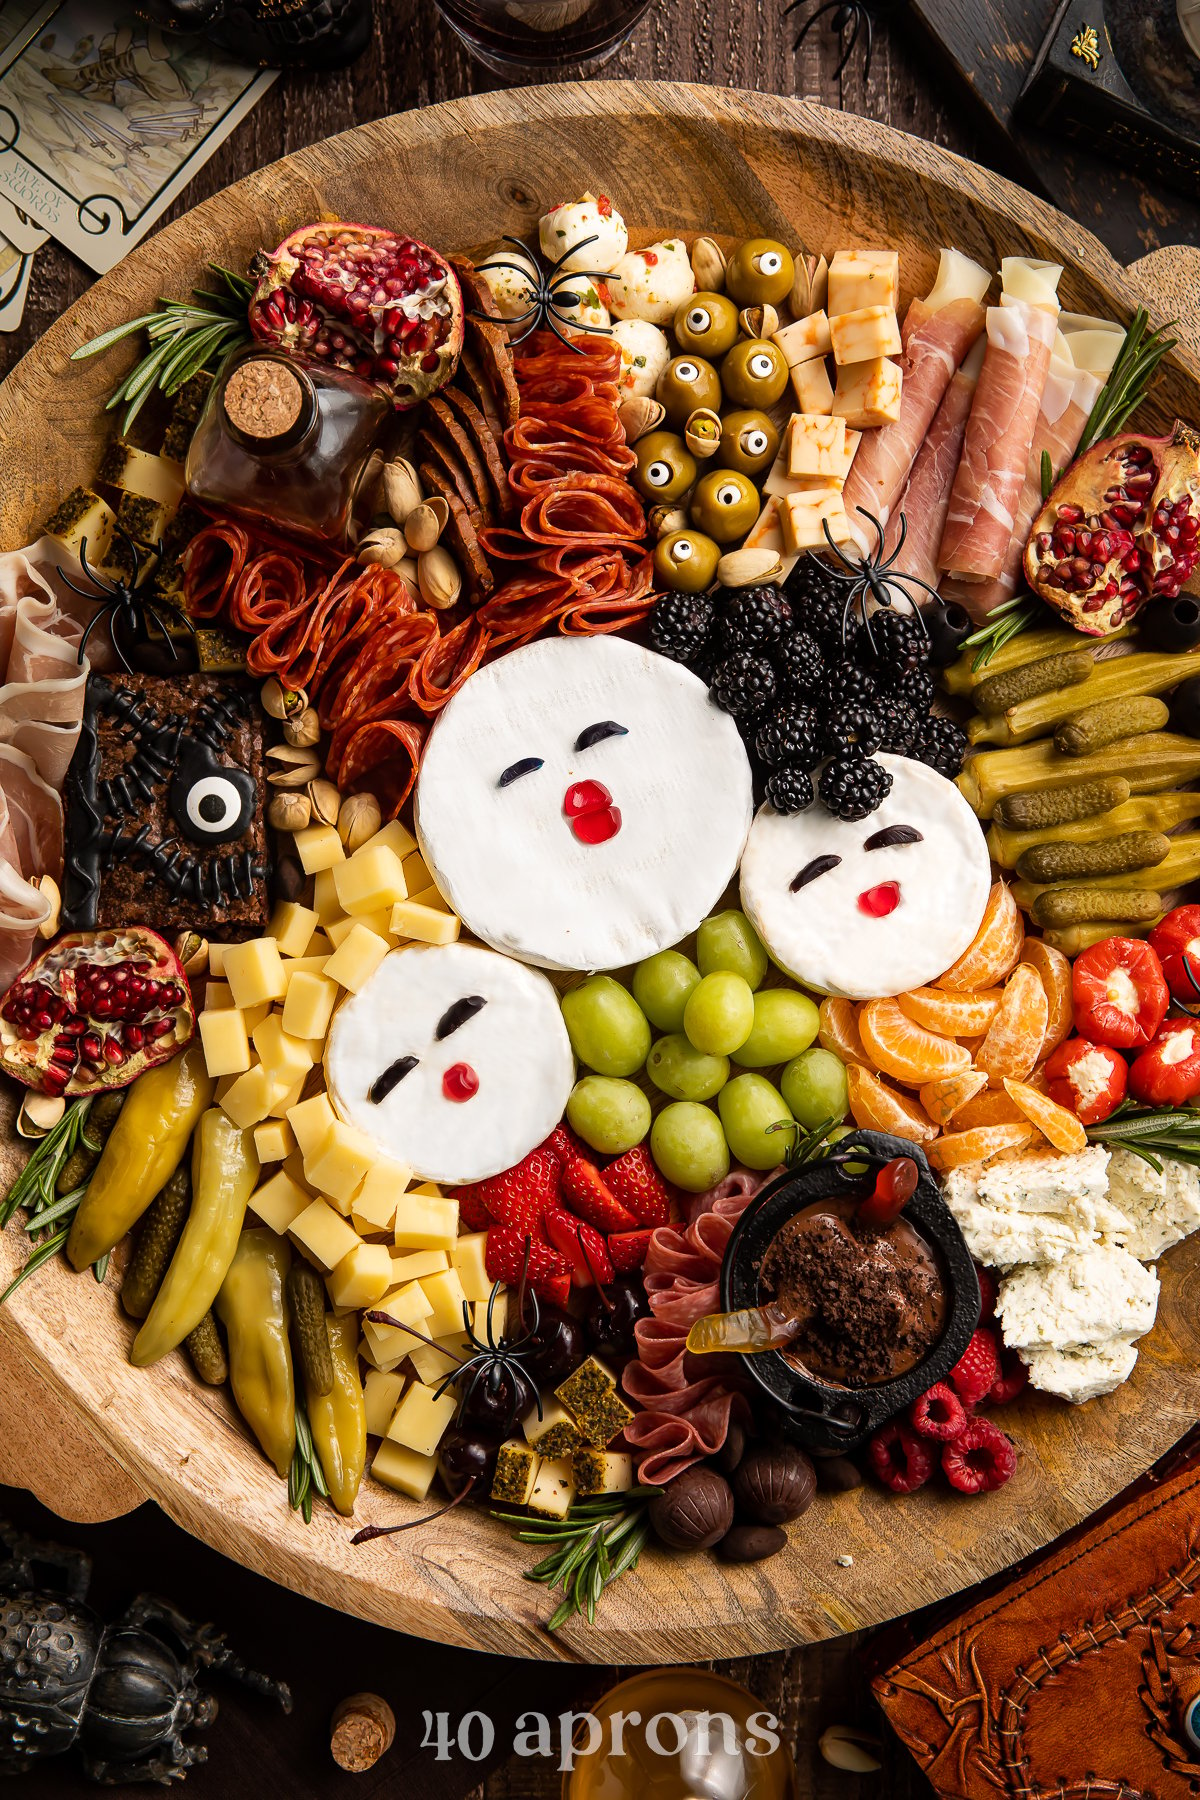 Overhead view of a Hocus Pocus themed charcuterie board with brie, fruit, cornichon, stuffed red peppers, marinated mozzarella, and other spooky snacks.